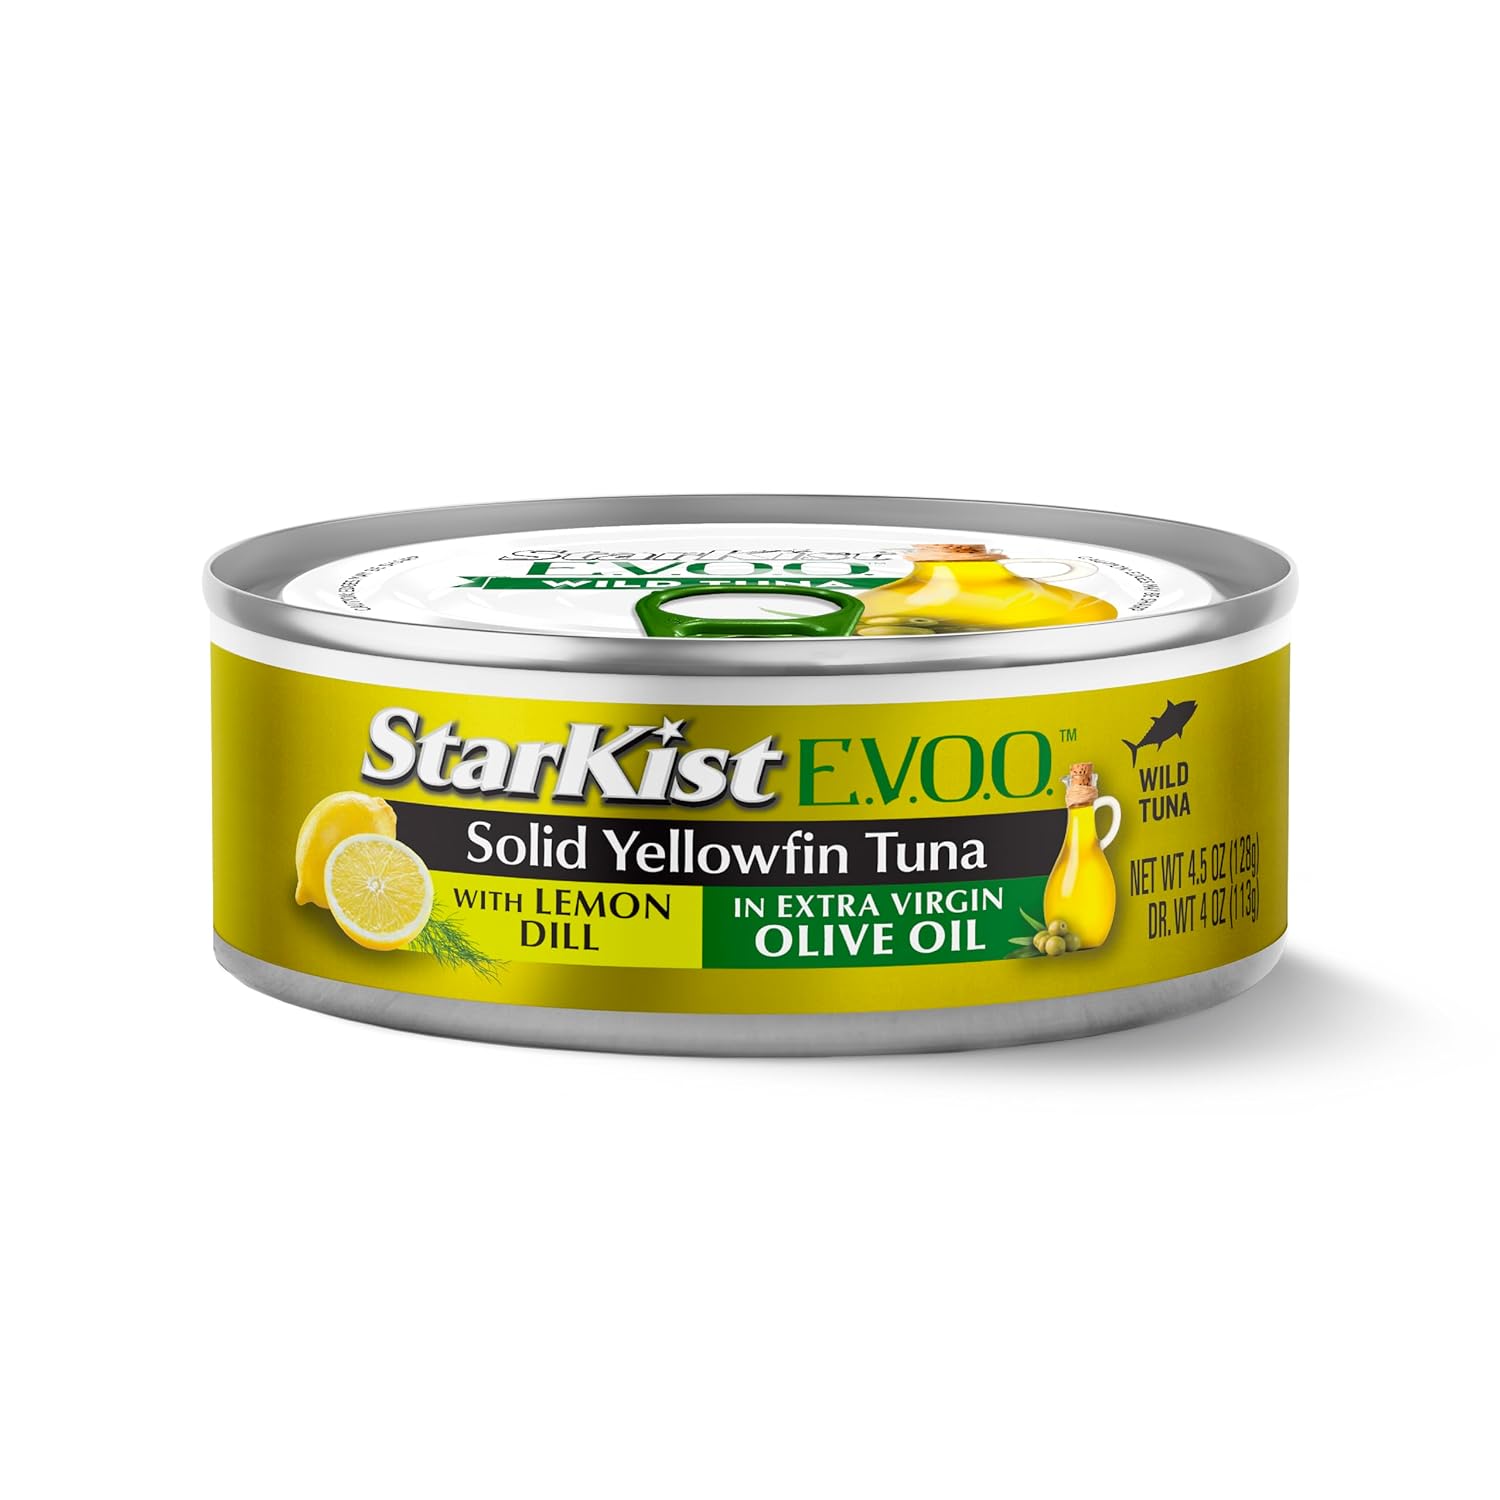 StarKist E.V.O.O. Solid Yellowfin Tuna with Lemon Dill and Extra Virgin Olive Oil (Packaging May vary), 4.5 Ounce (Pack of 12)